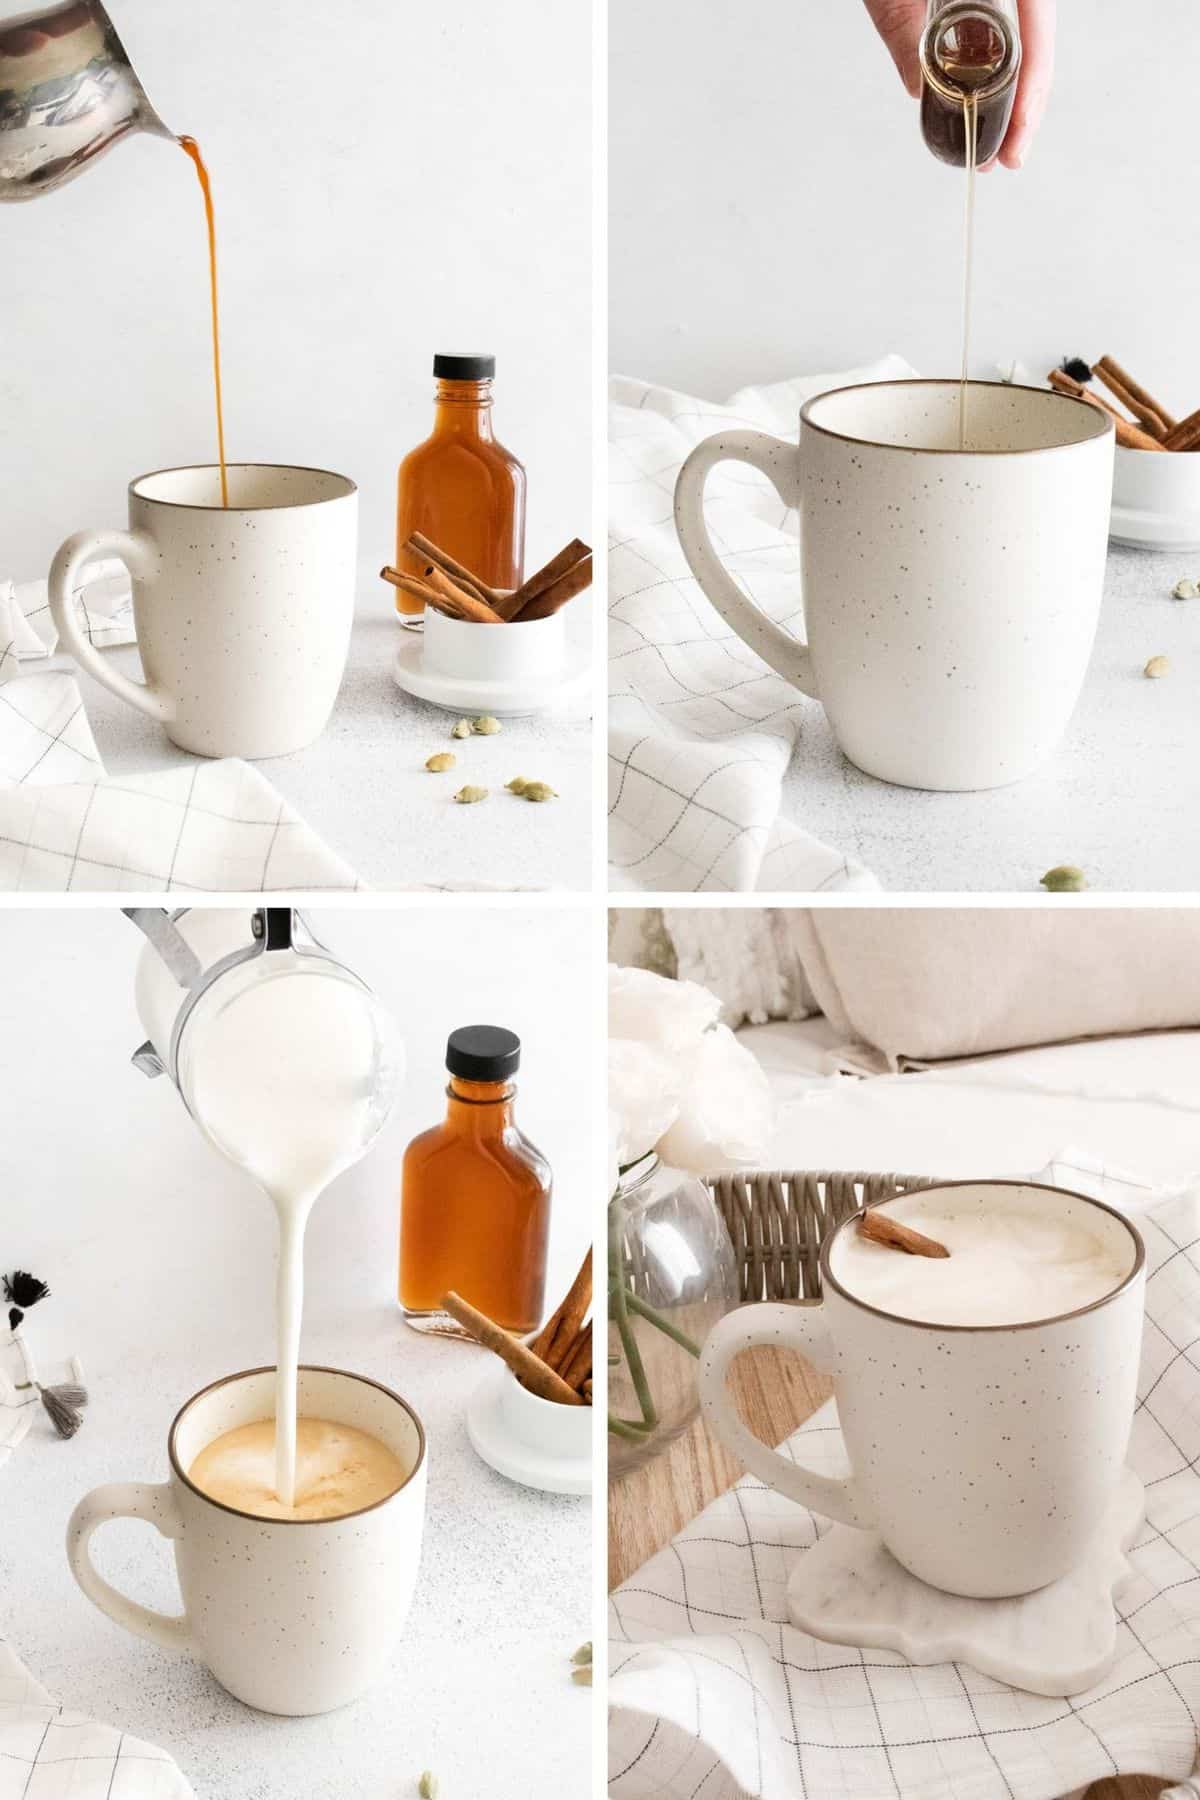 Four images showing a latte being made with homemade syrup.